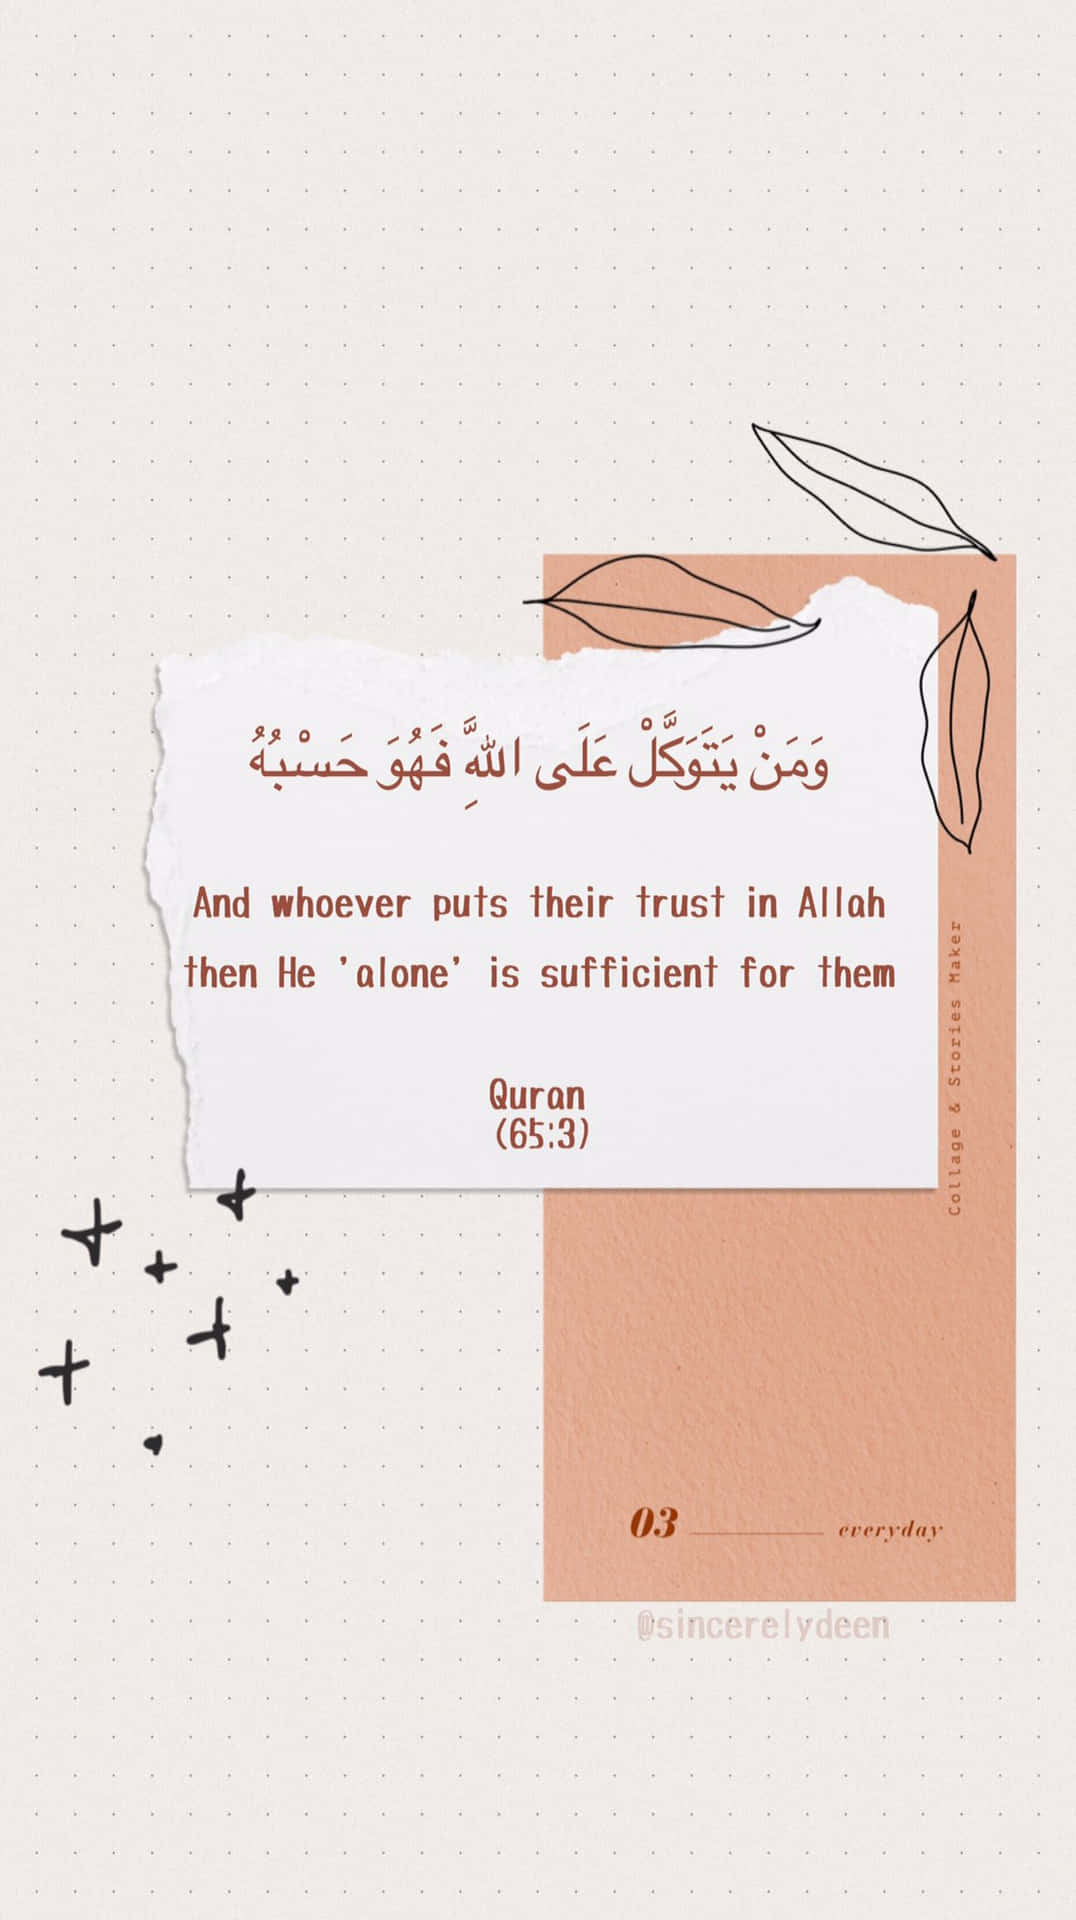 Islamic Quotes And Verses - Islamic Quotes Wallpaper